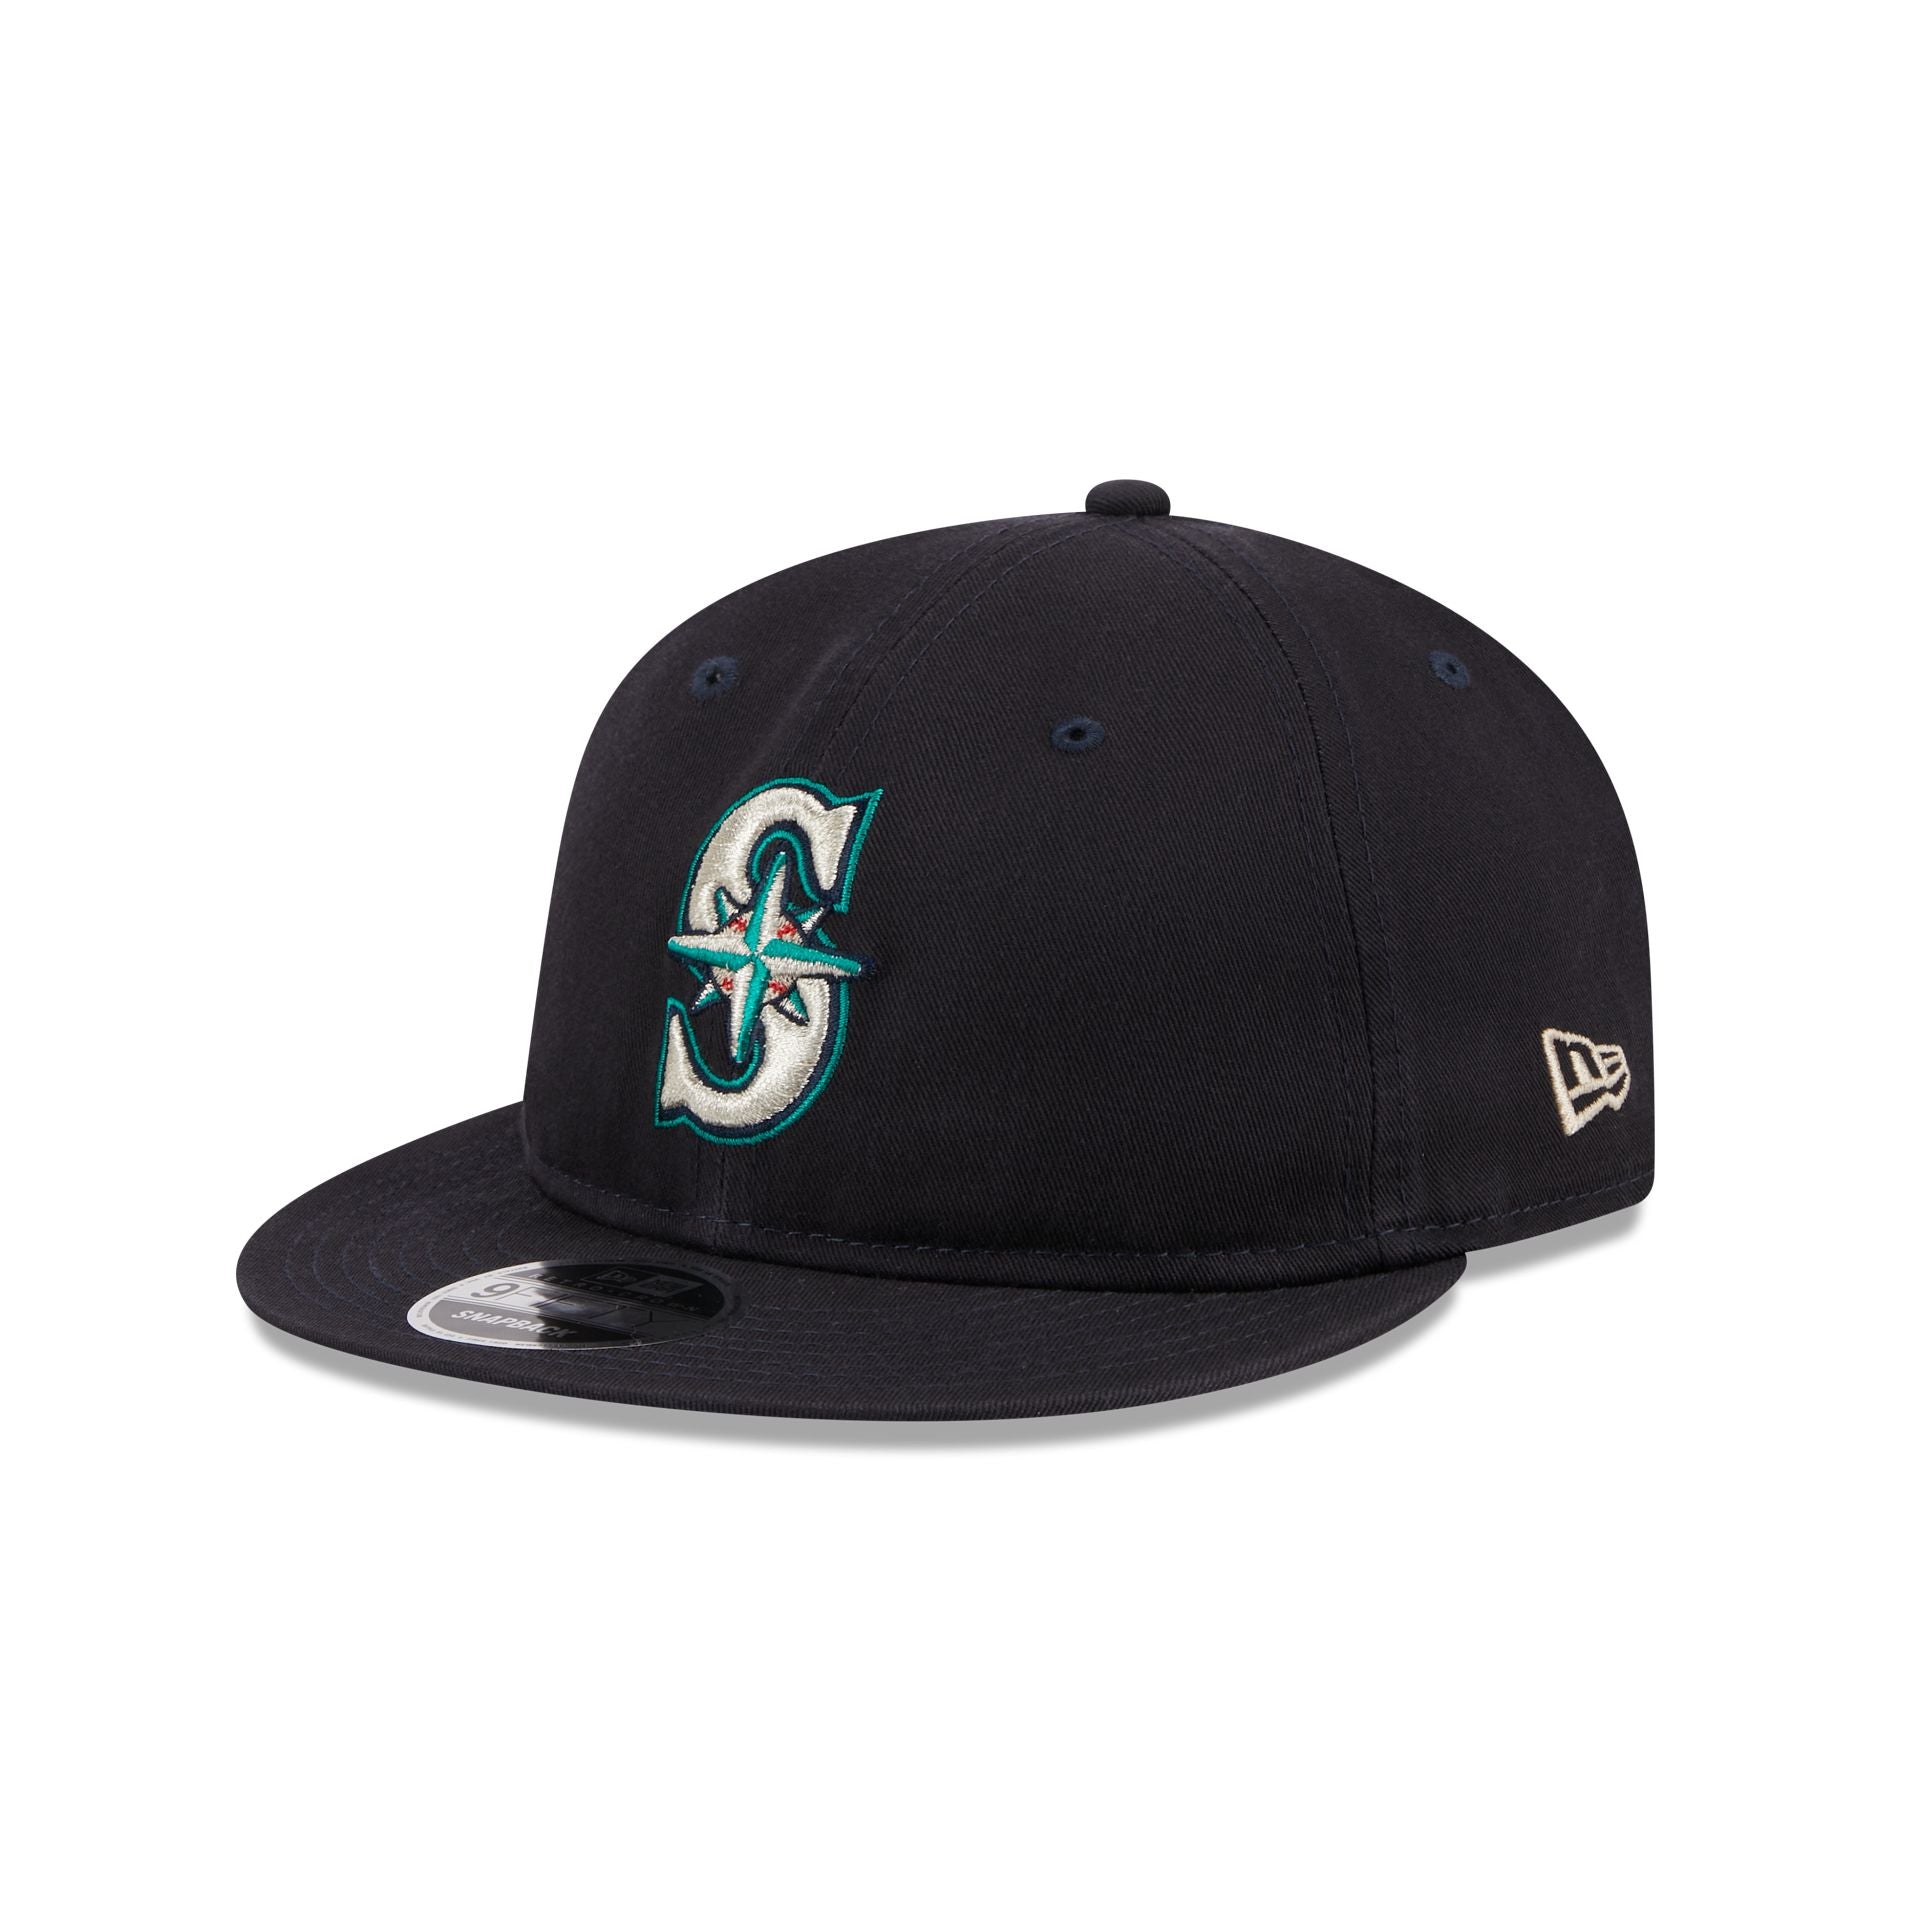 New Era Men's New Era Green Seattle Mariners Color Pack 59FIFTY Fitted Hat